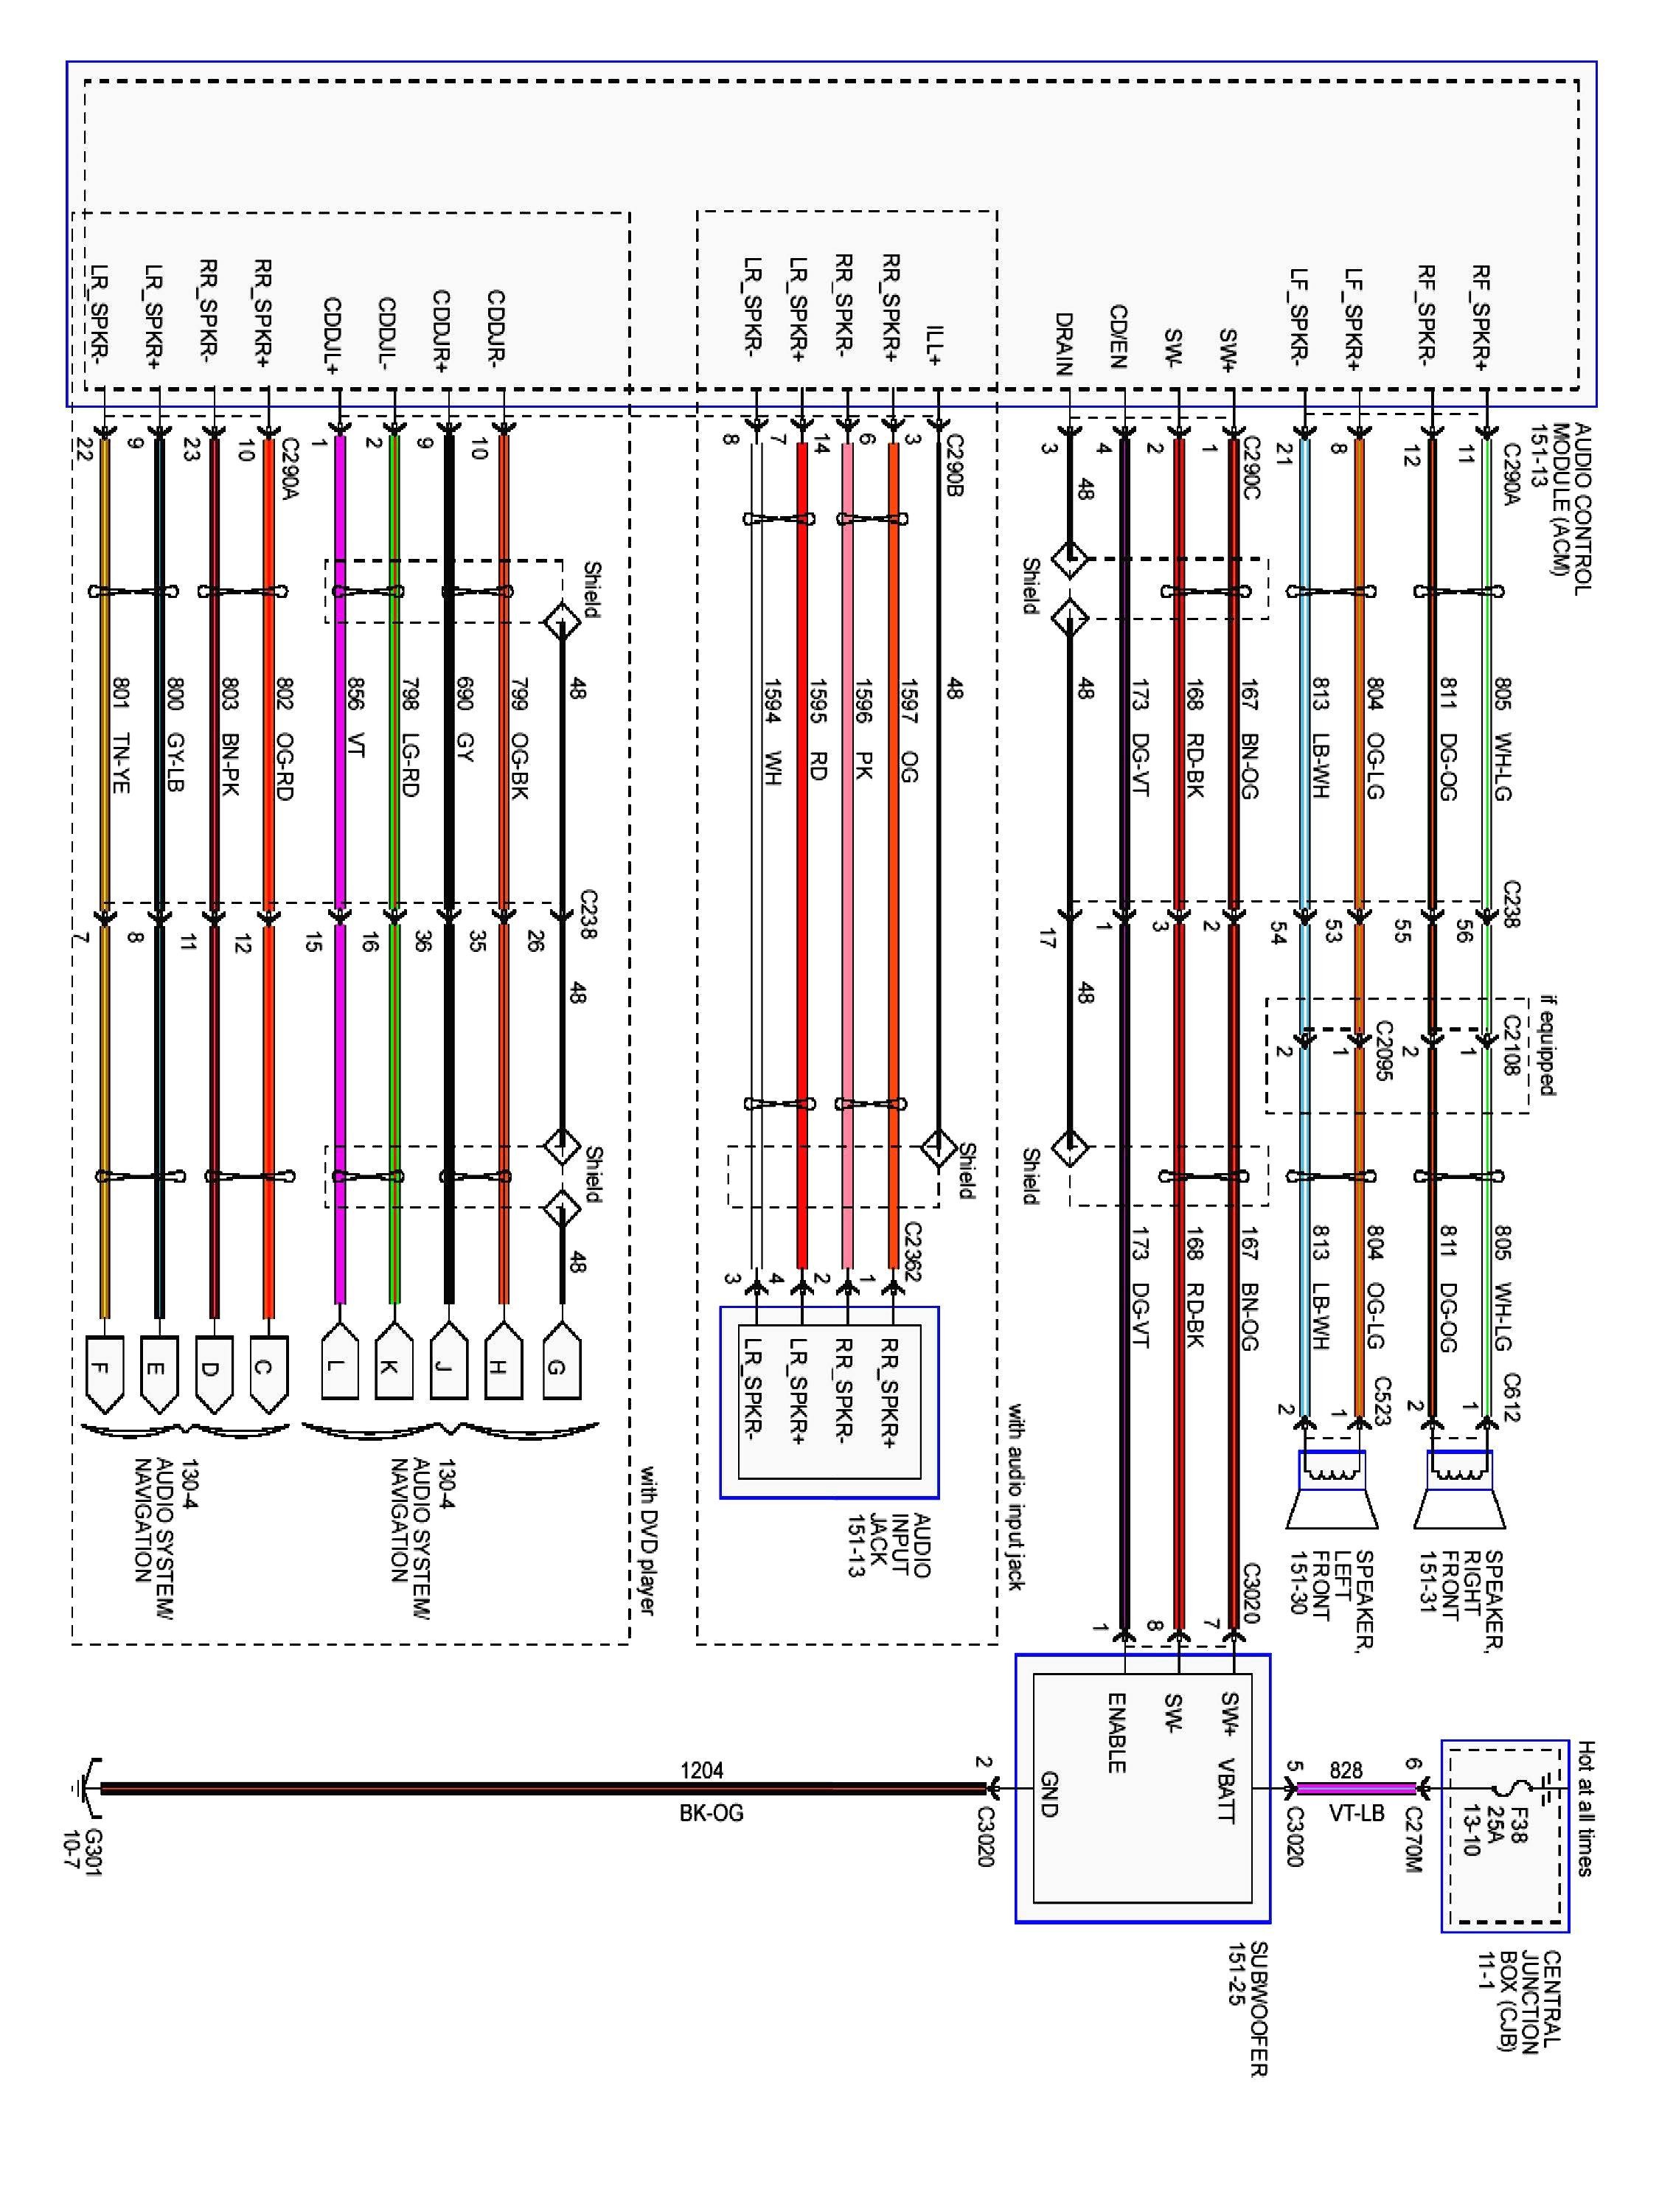 Clarion Car Stereo Wiring Diagram Deck Wiring Diagram Wiring Diagram Of Clarion Car Stereo Wiring Diagram